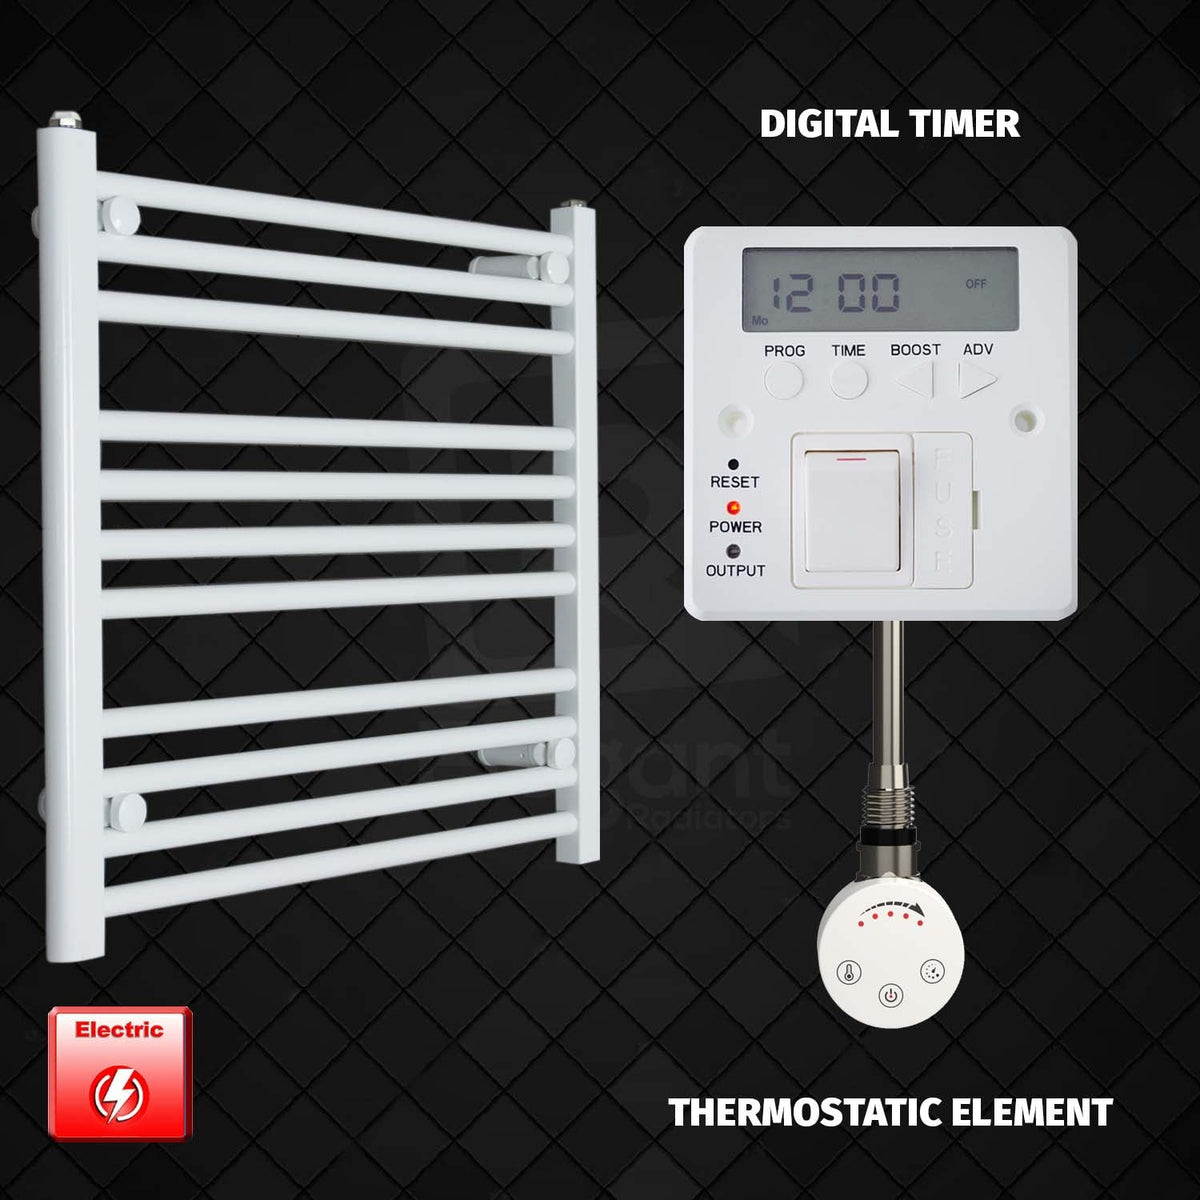 600 mm High 700 mm Wide Pre-Filled Electric Heated Towel Rail Radiator White HTR SMR Thermostatic Element Digital Timer